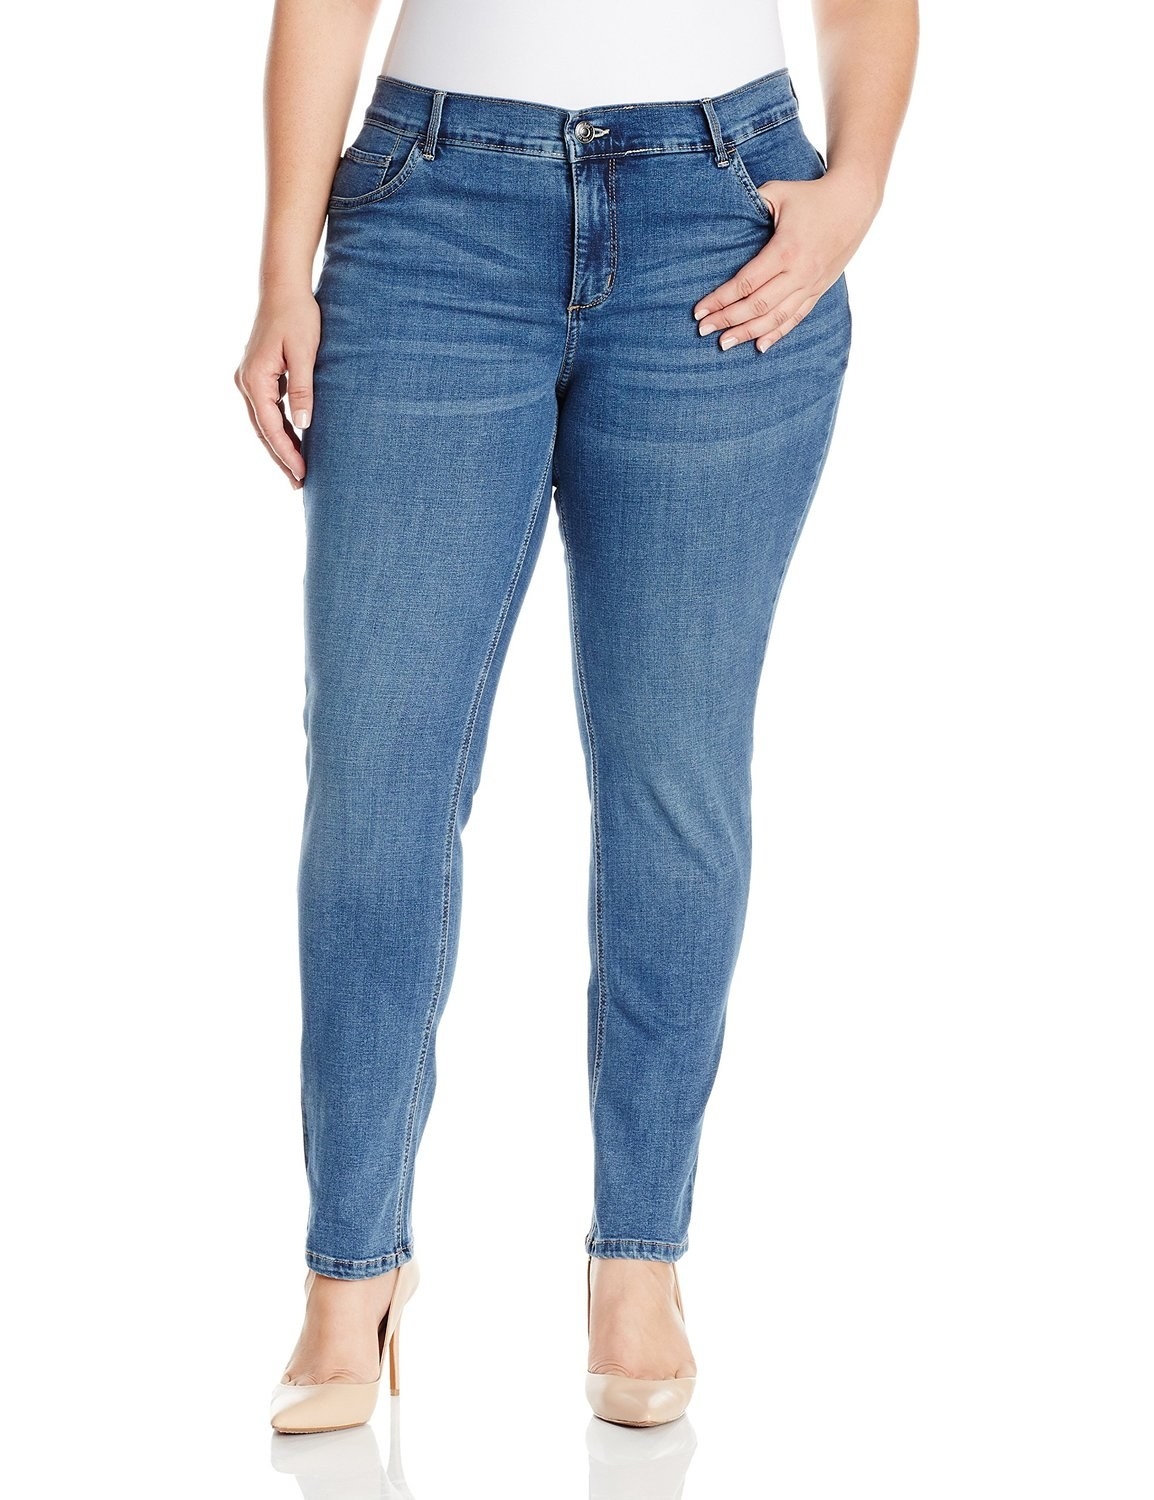 24 Amazing Pairs Of Jeans That People Actually Swear By